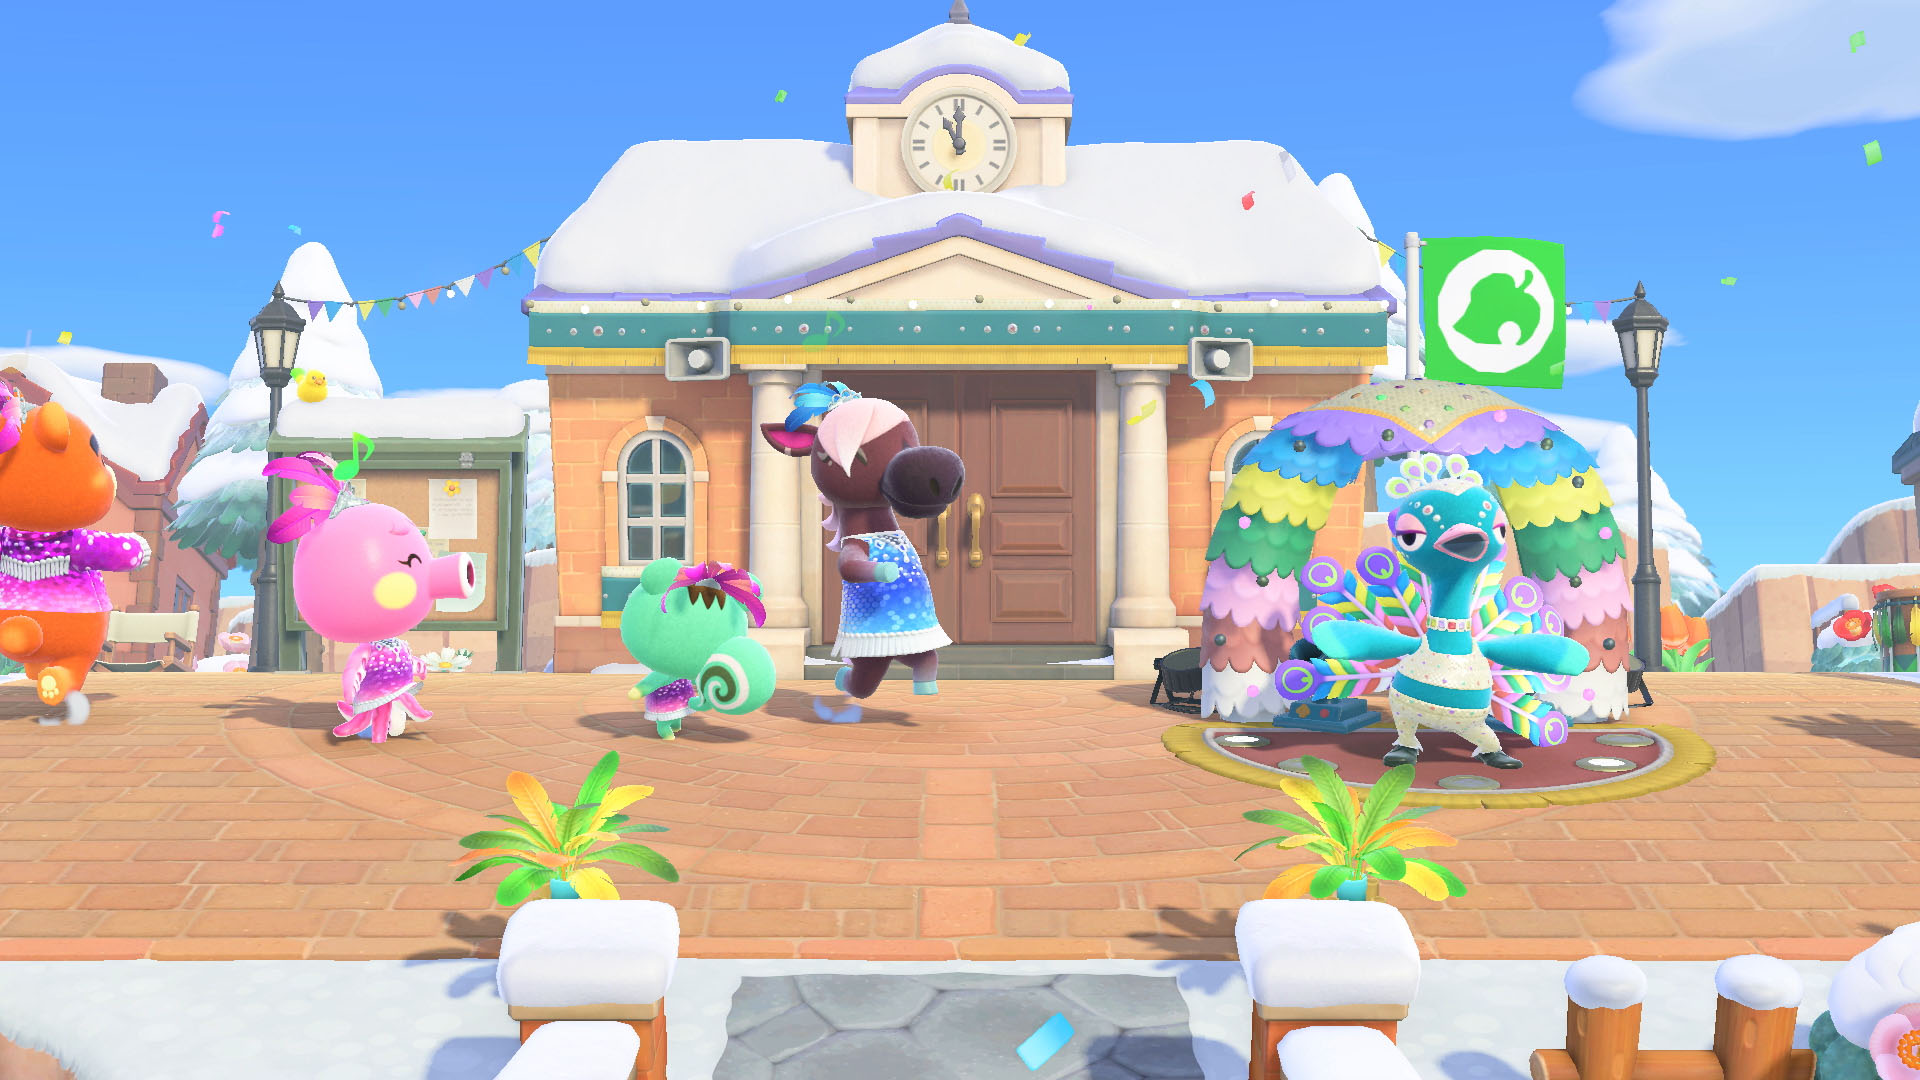 Festivale event coming to Animal Crossing New Horizons